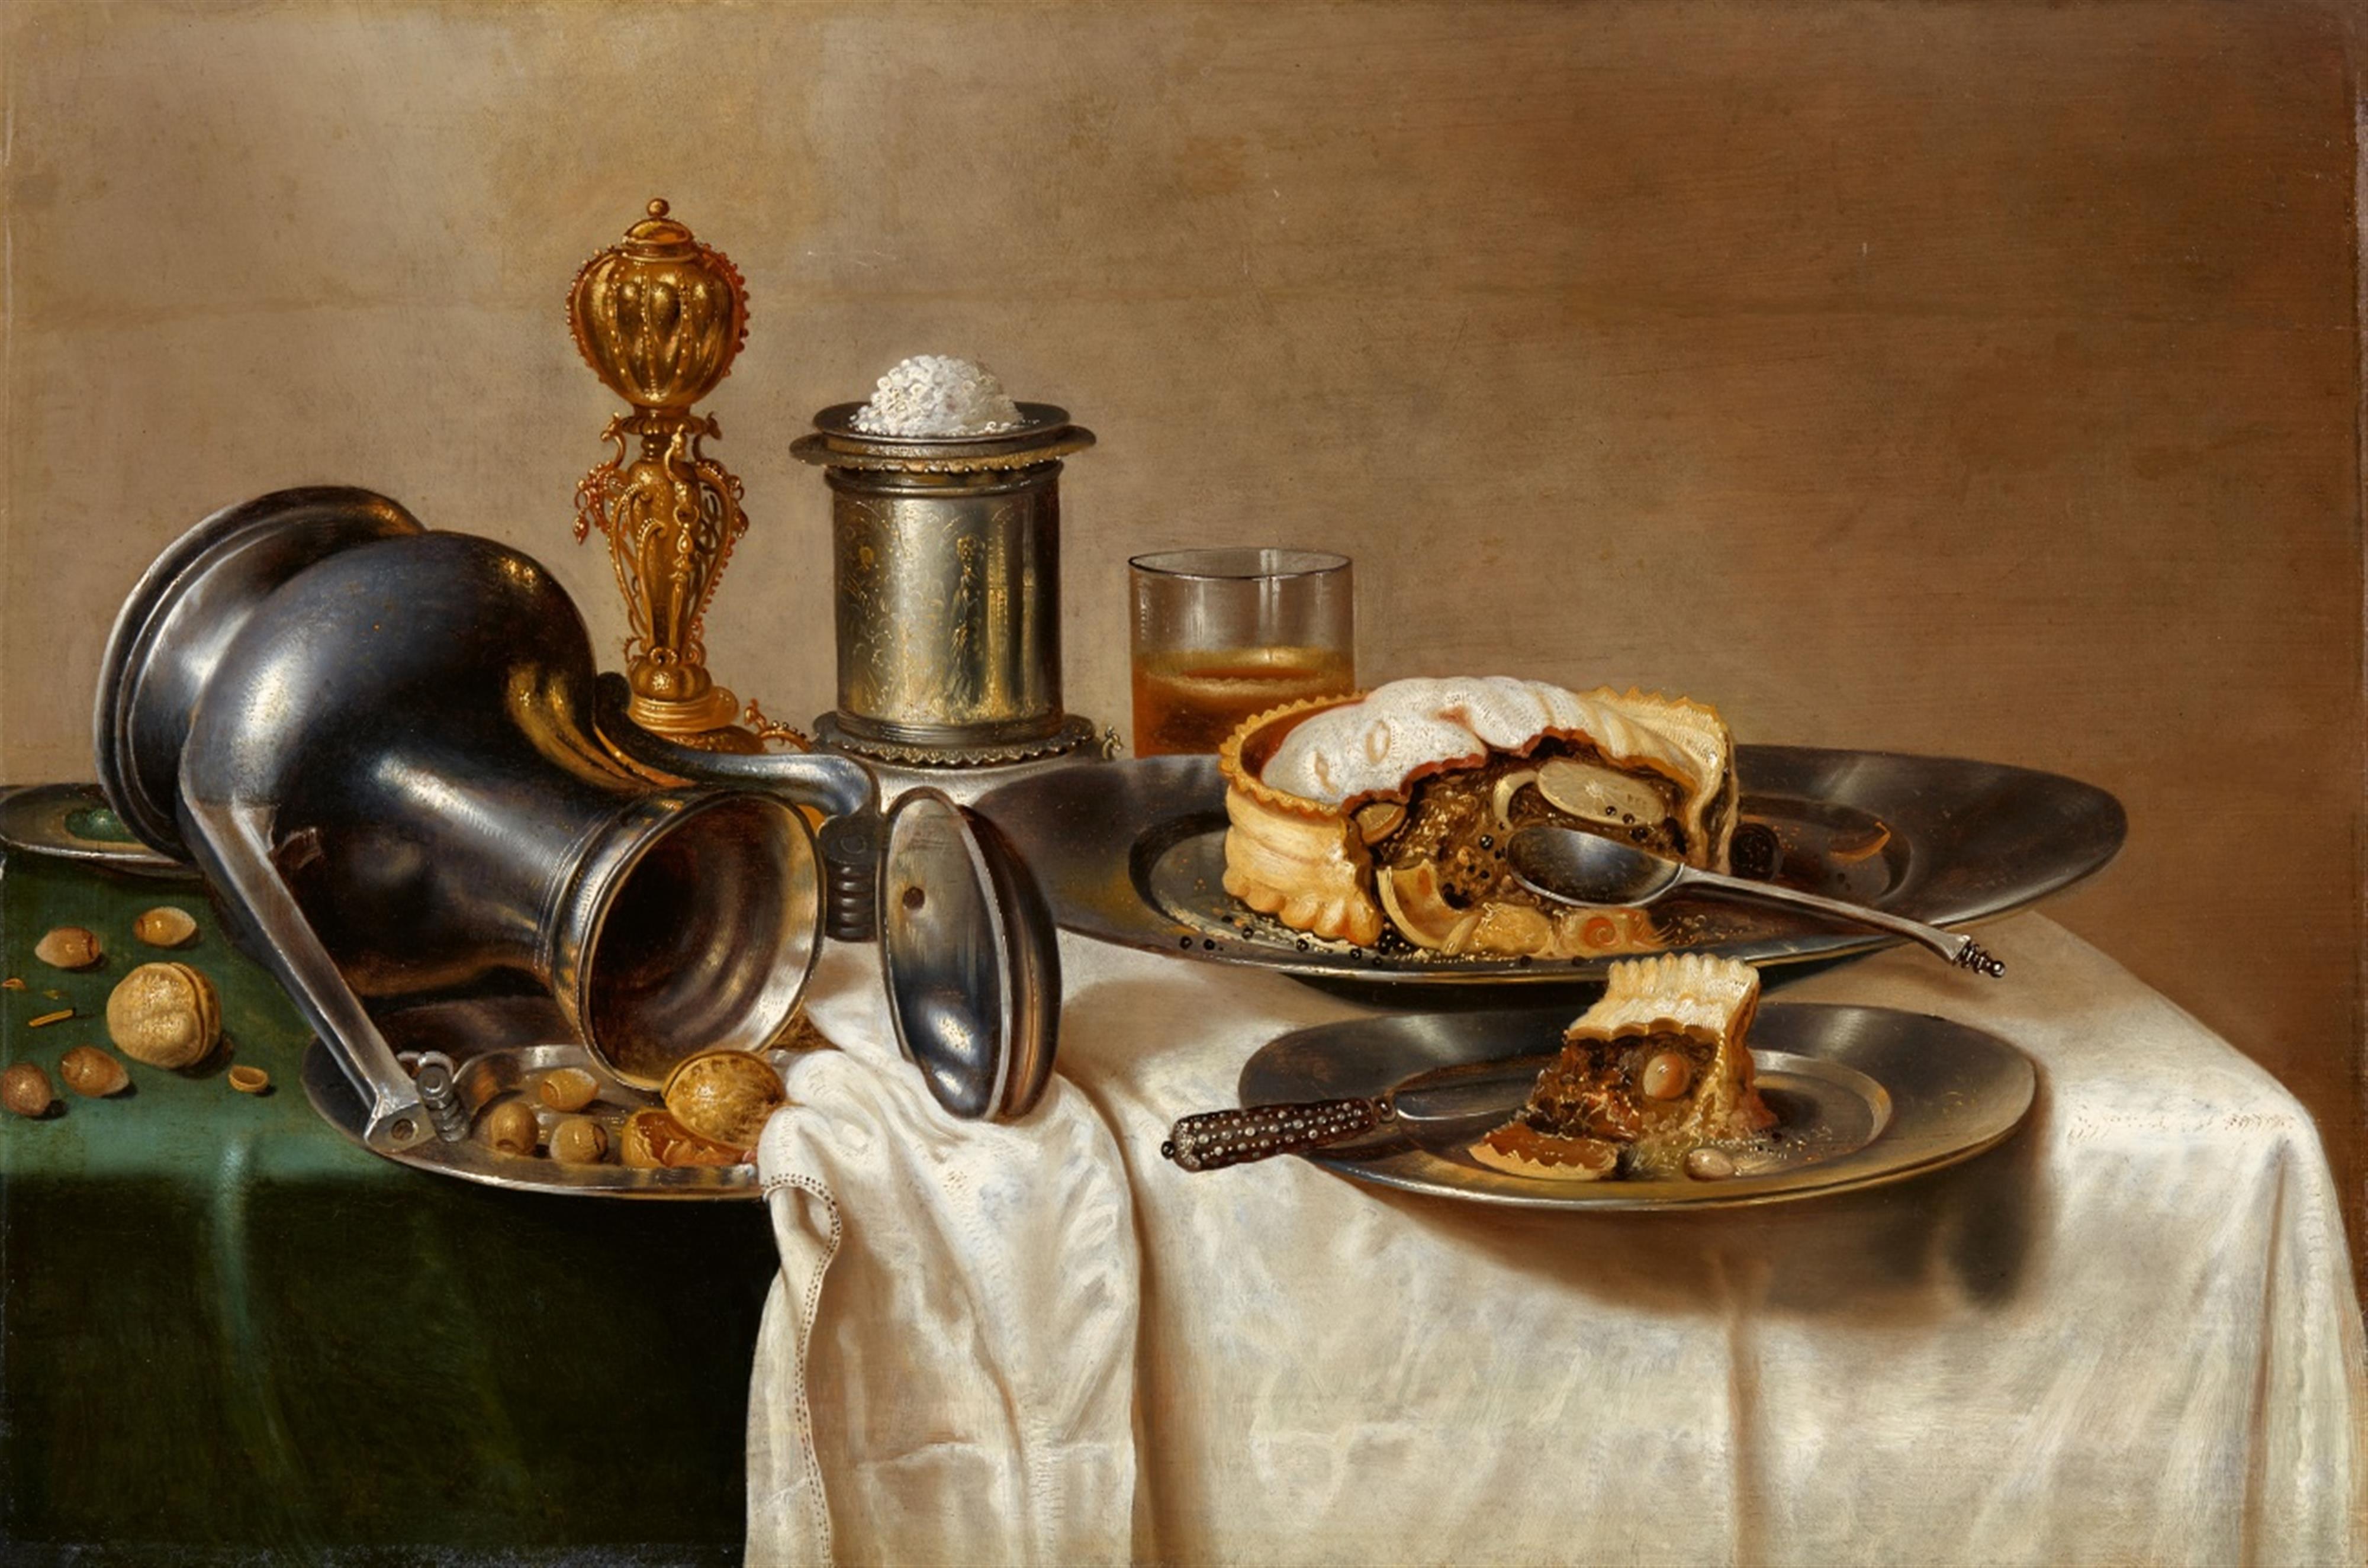 Cornelis Mahu - Still Life with a Pastry, Nuts, a Salt Dish, Pewter Plates, and a Pitcher - image-1